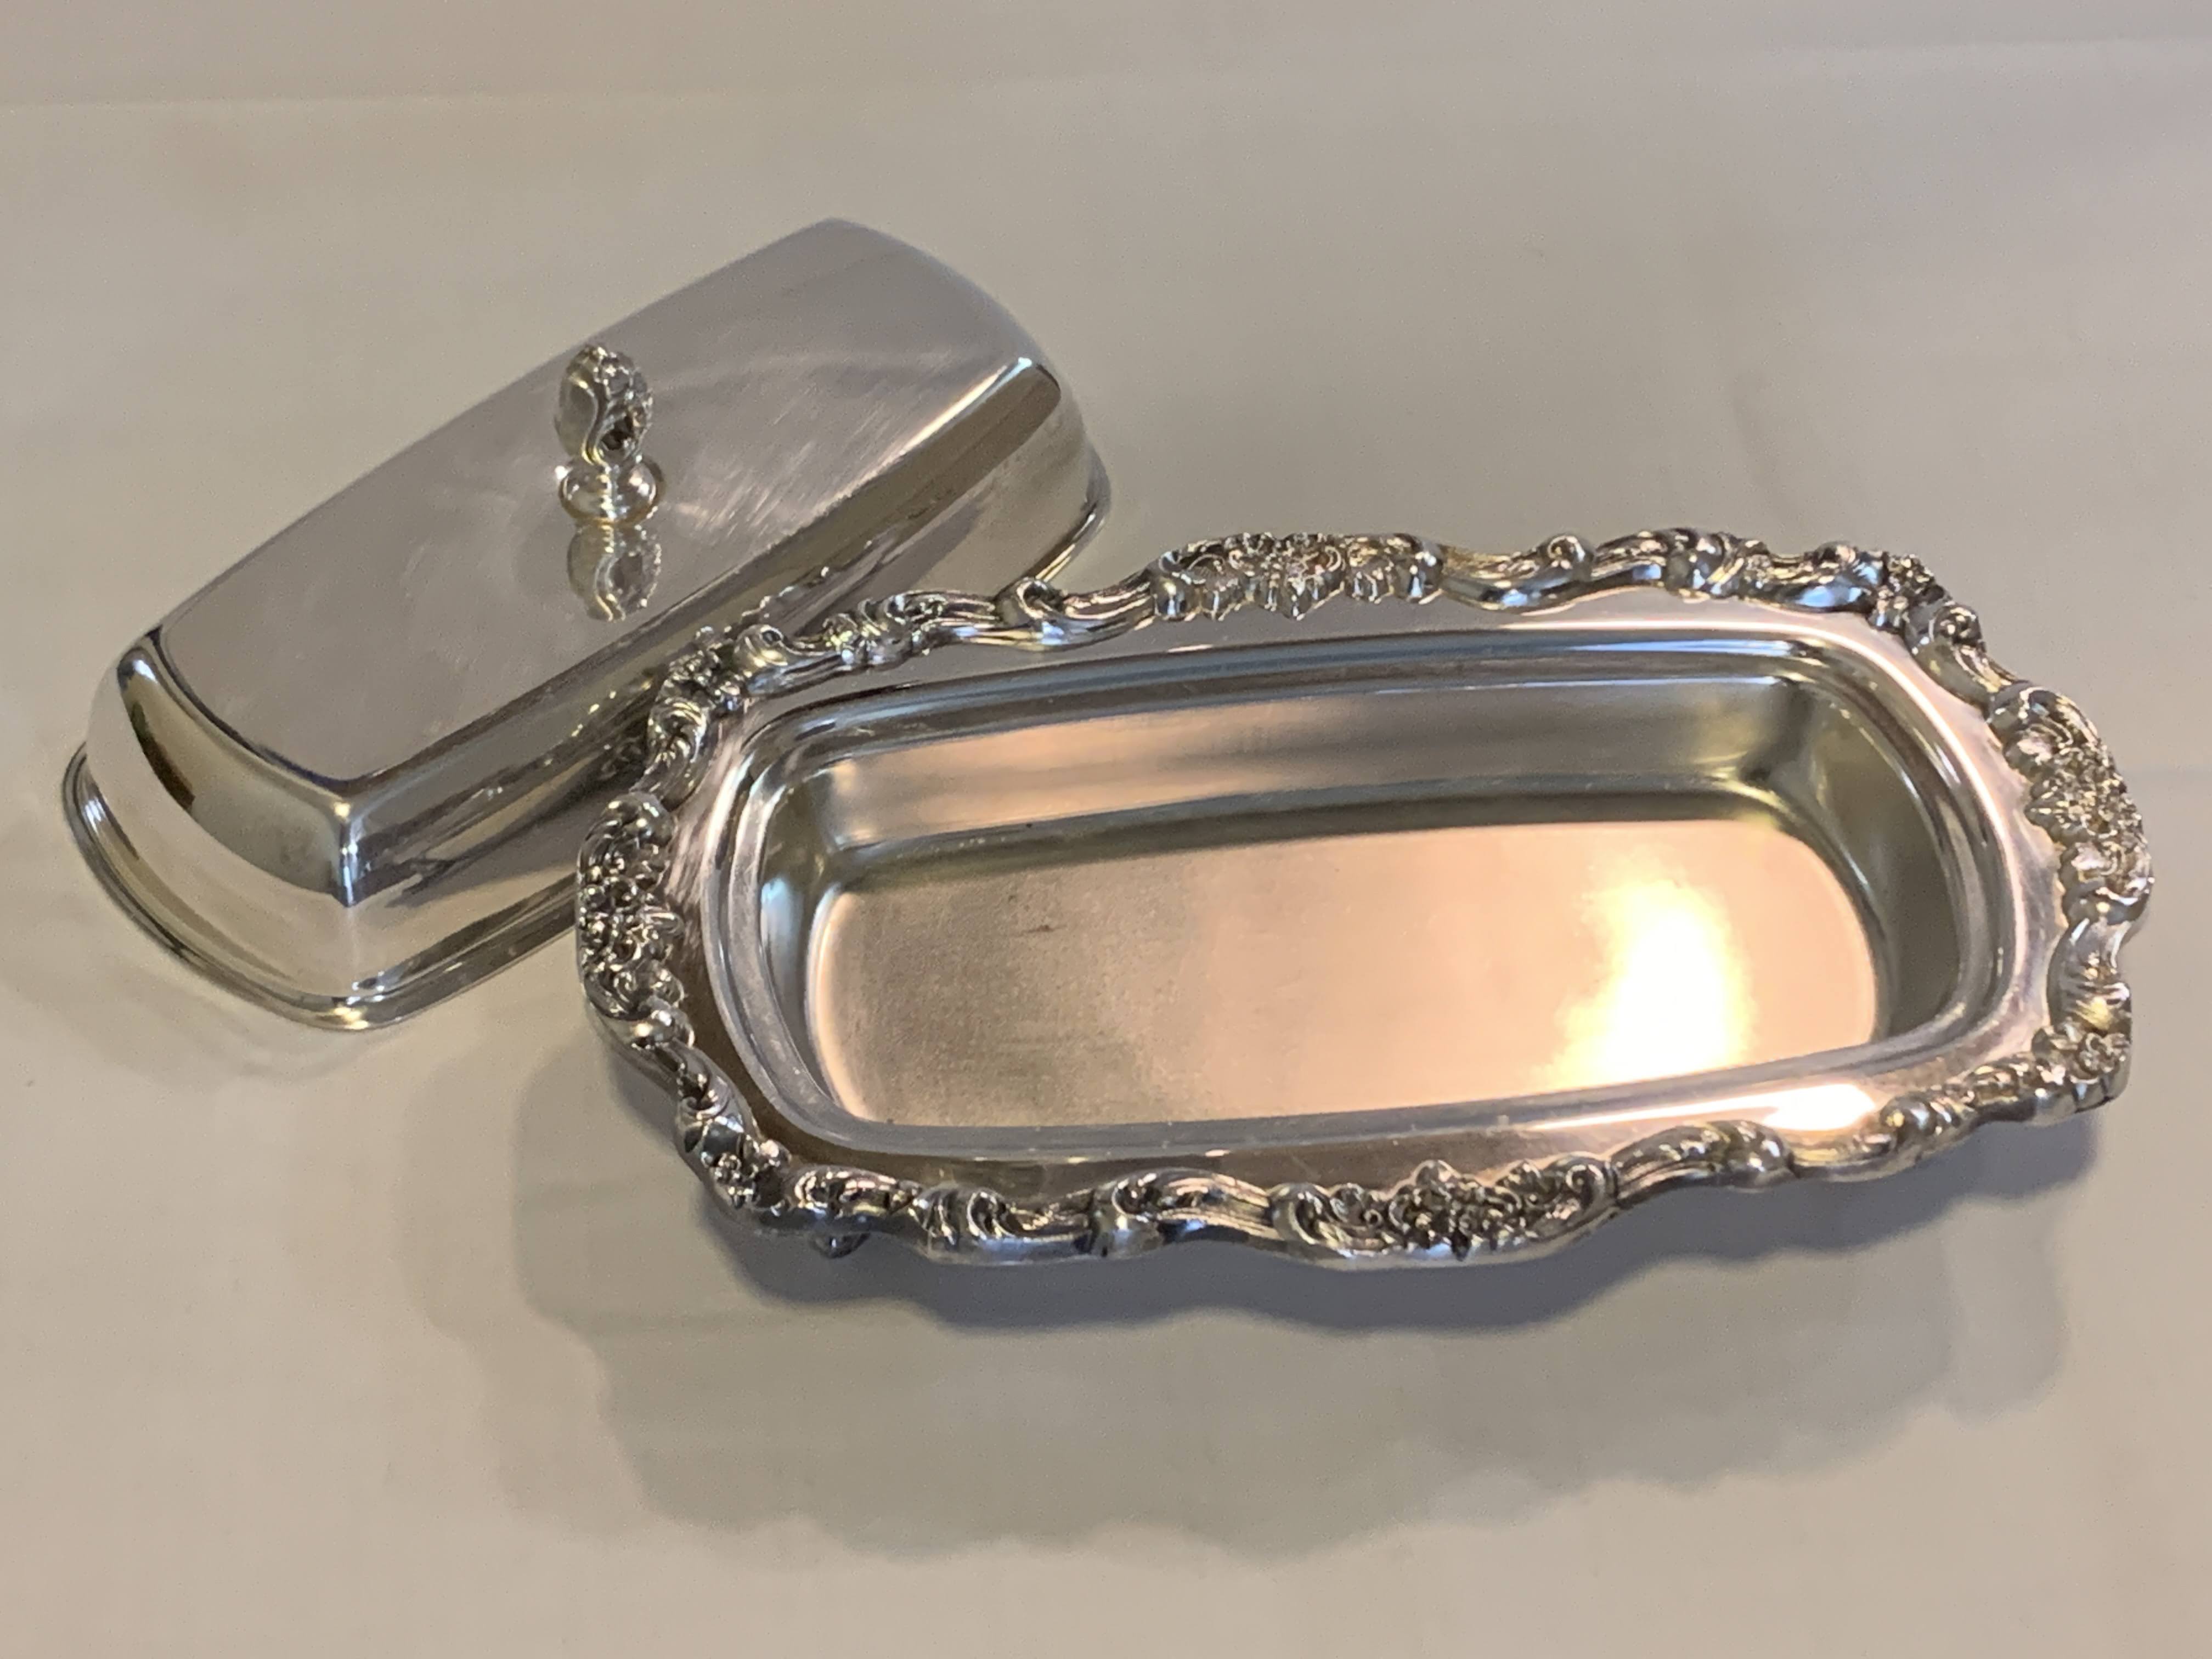 Silver Plated Mid Century Butter Dish - Ornate Rim